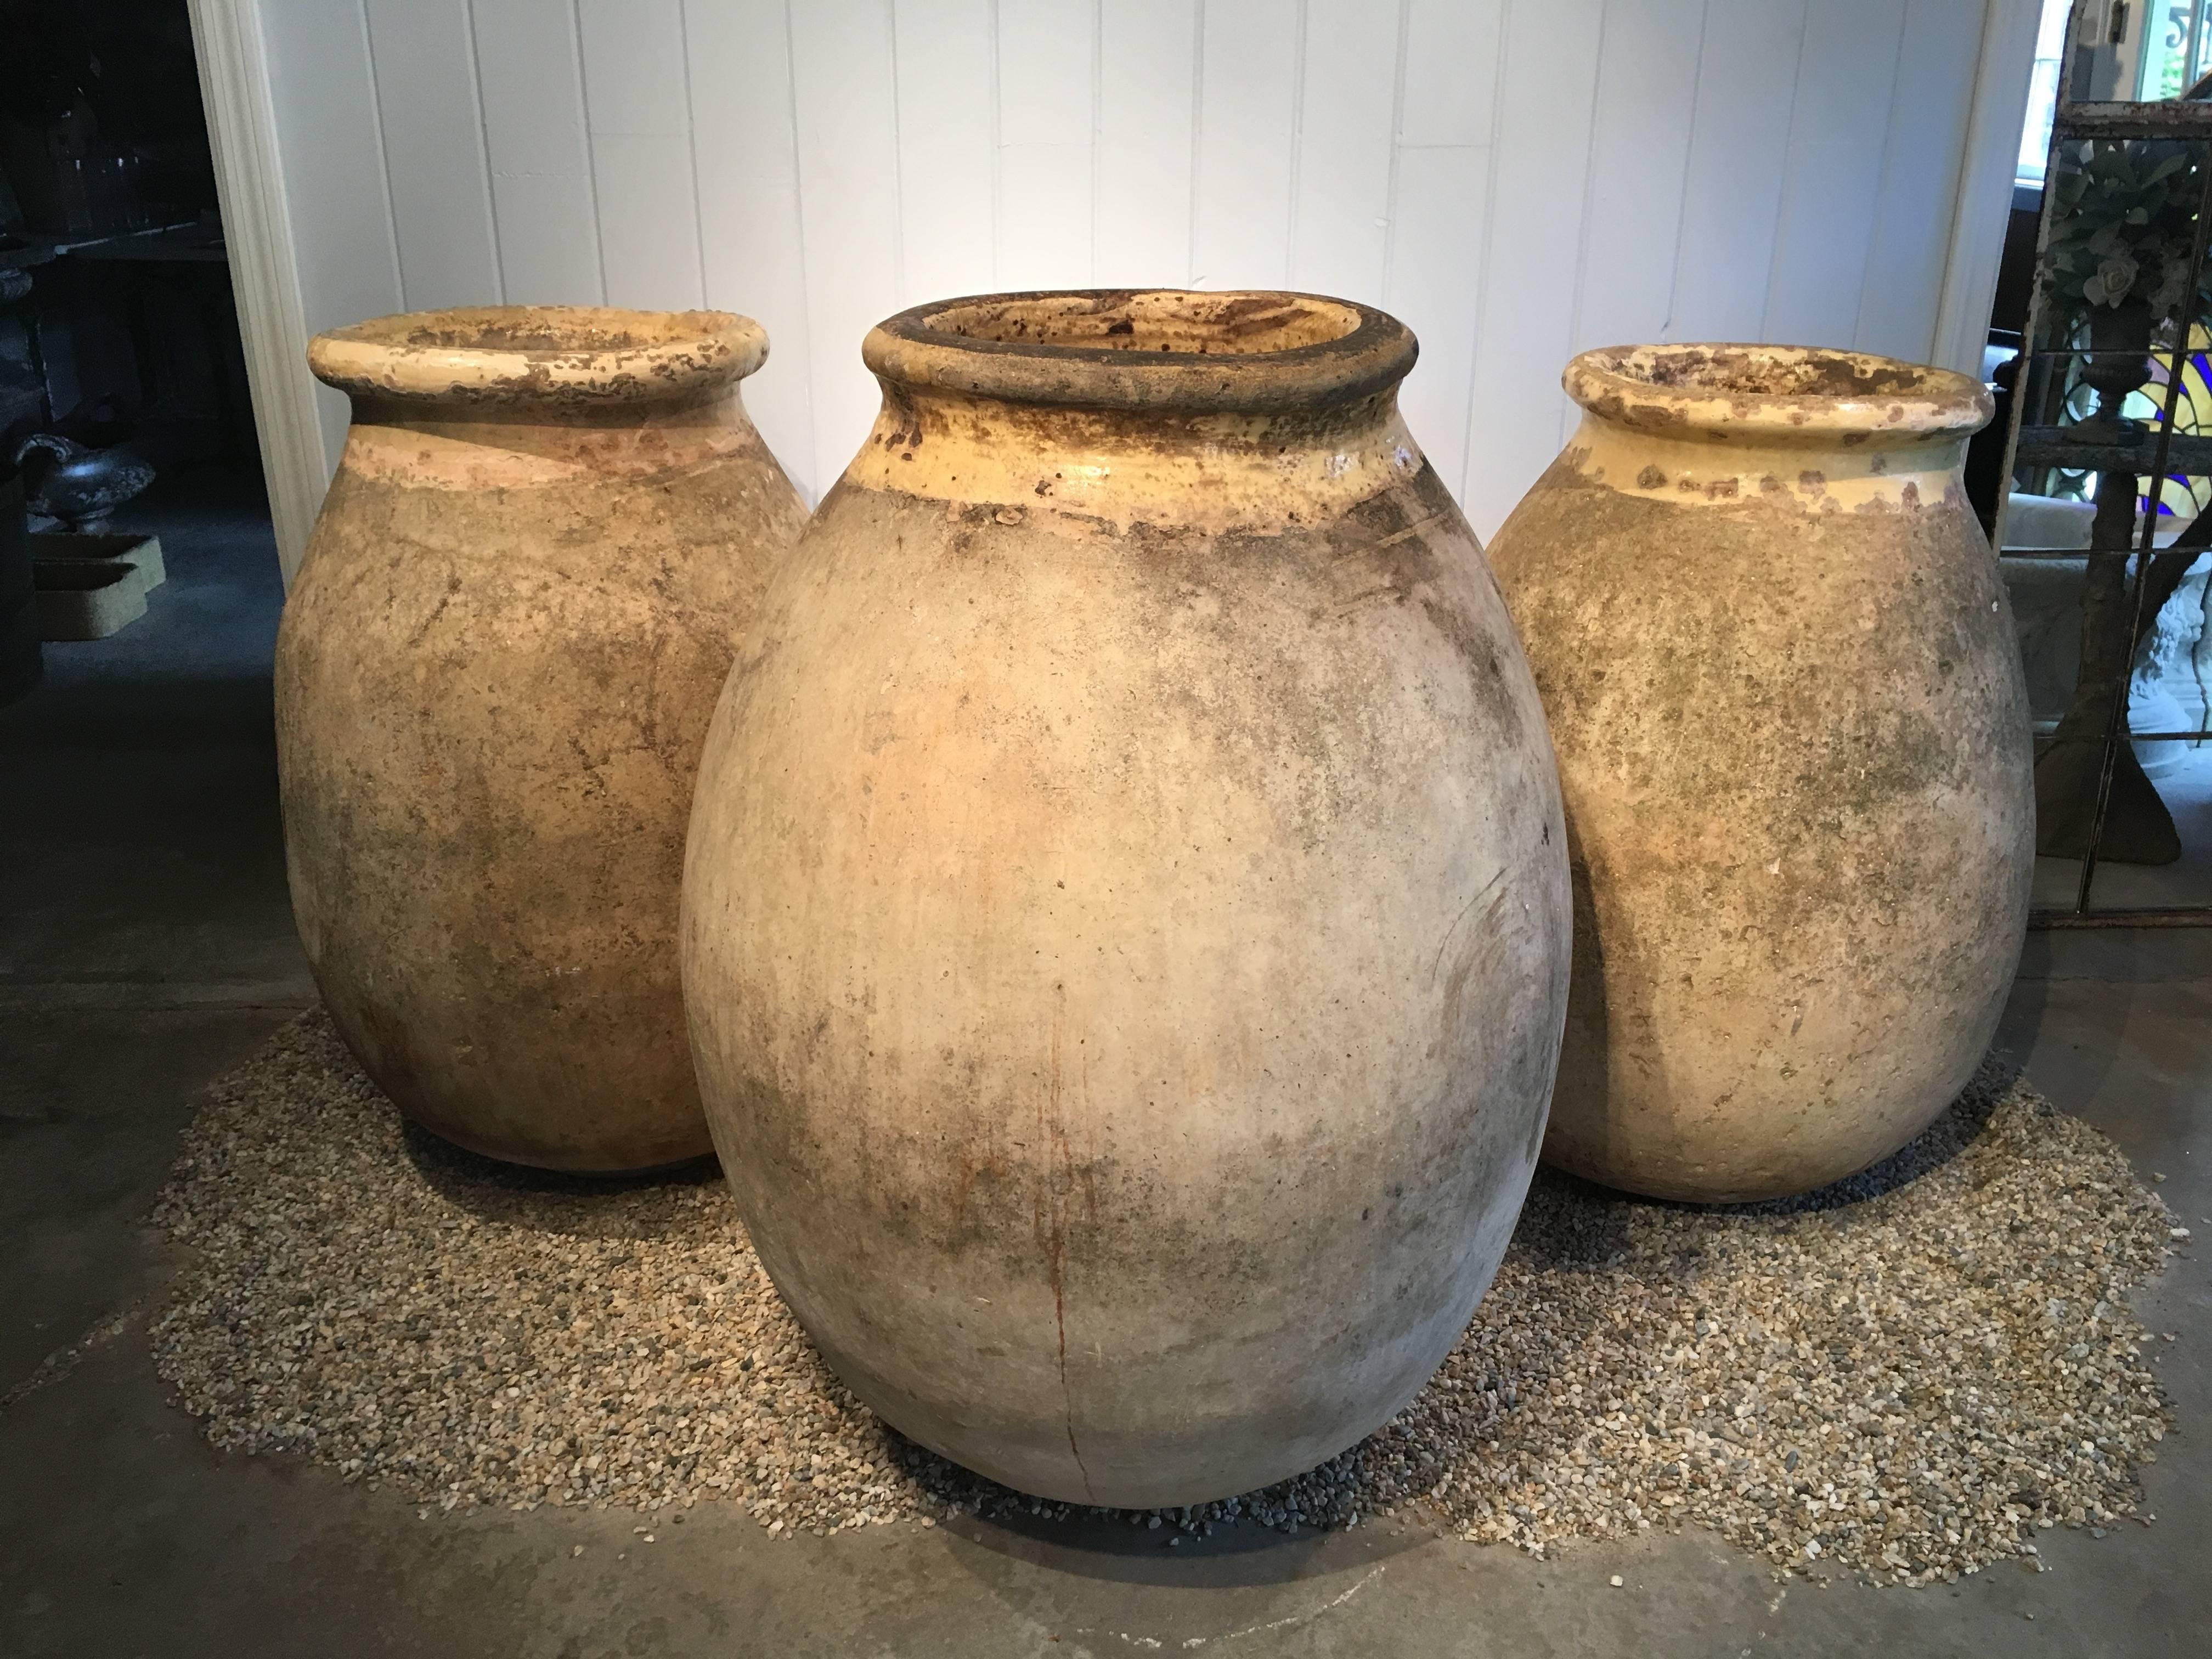 In all our travels, we have never come across a Biot Pot this large and in such wonderful condition. Dating to the early 18th century, it ticks all our boxes, from its creamy color to its butter yellow rim glaze to its lightly weathered patina.